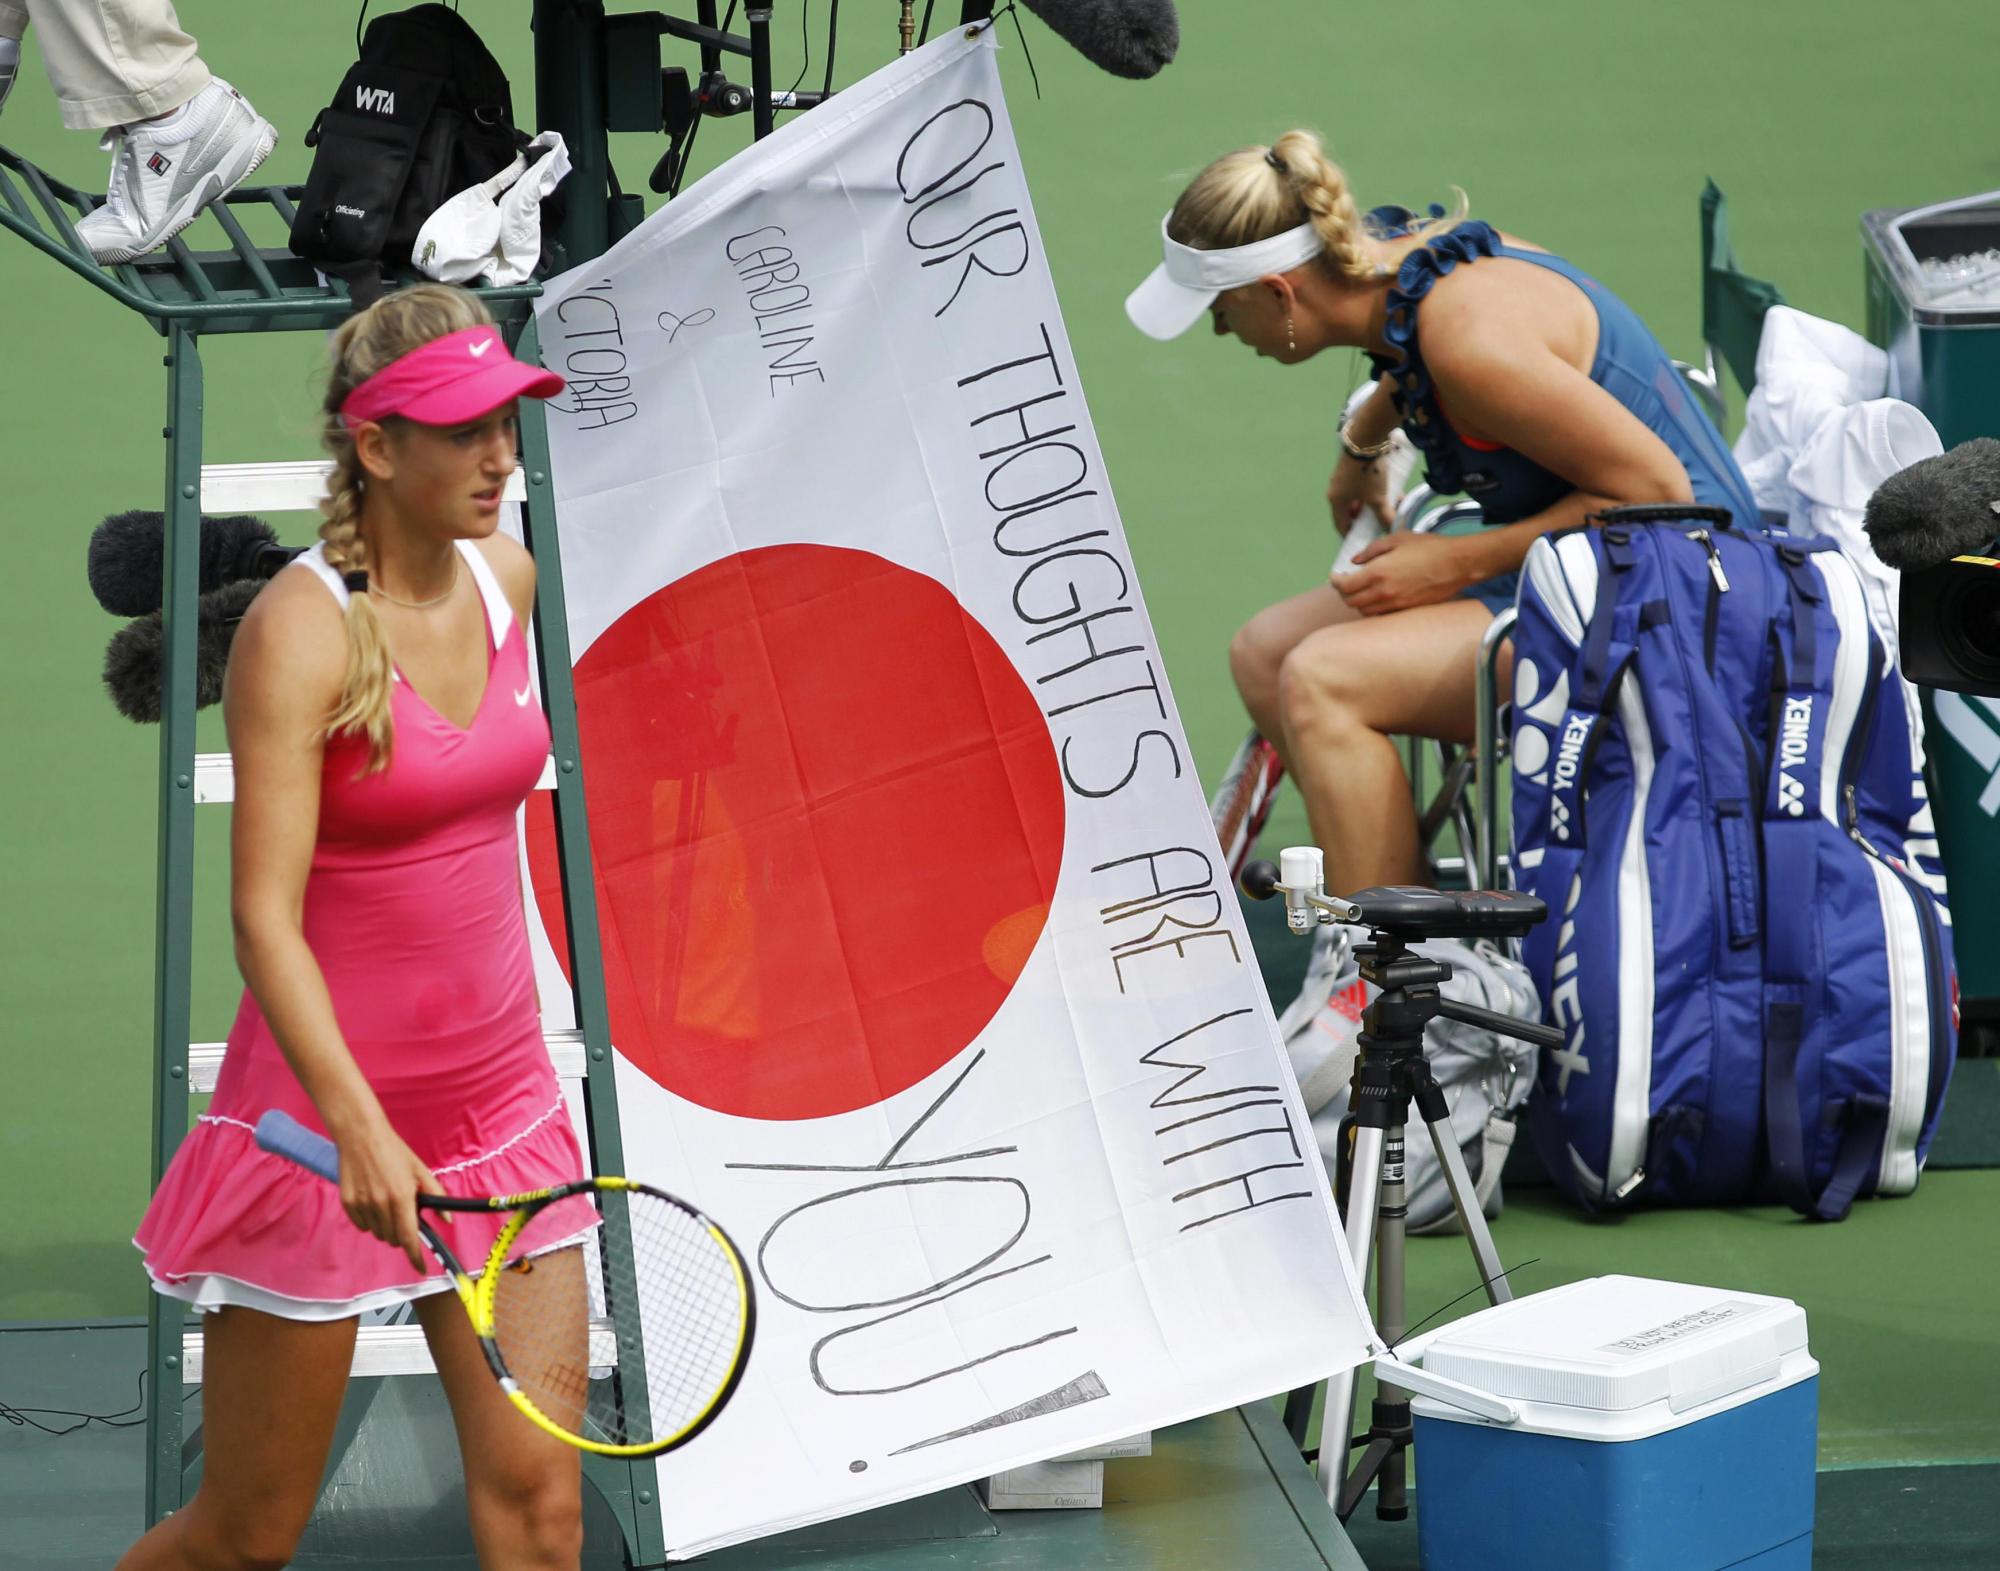 Tribute to Japan on tennis court